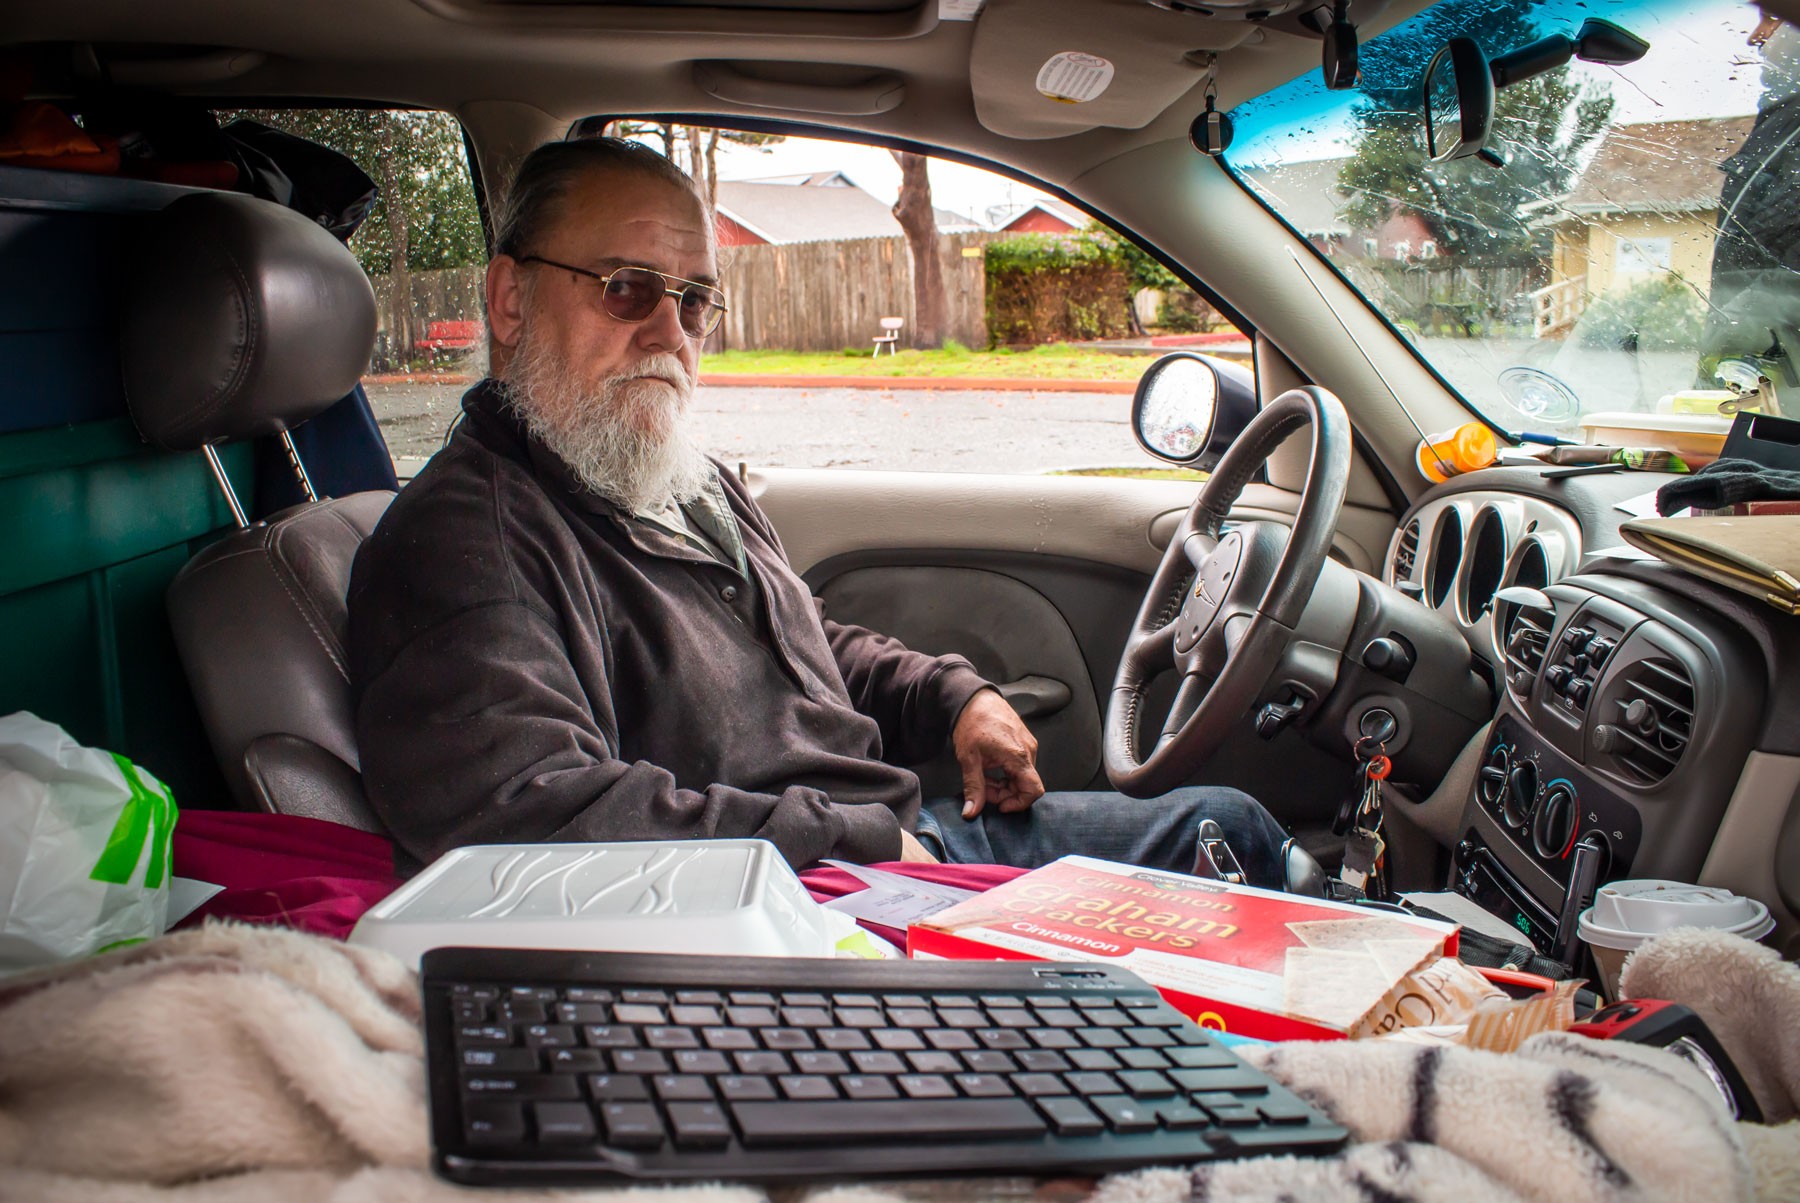 Robert Stretton inside his PT Cruiser in the parking lot of Sempervirens, with his wireless keyboard by his side and a prescription pill bottle on the dashboard. - PHOTO BY T.WILLIAM WALLIN